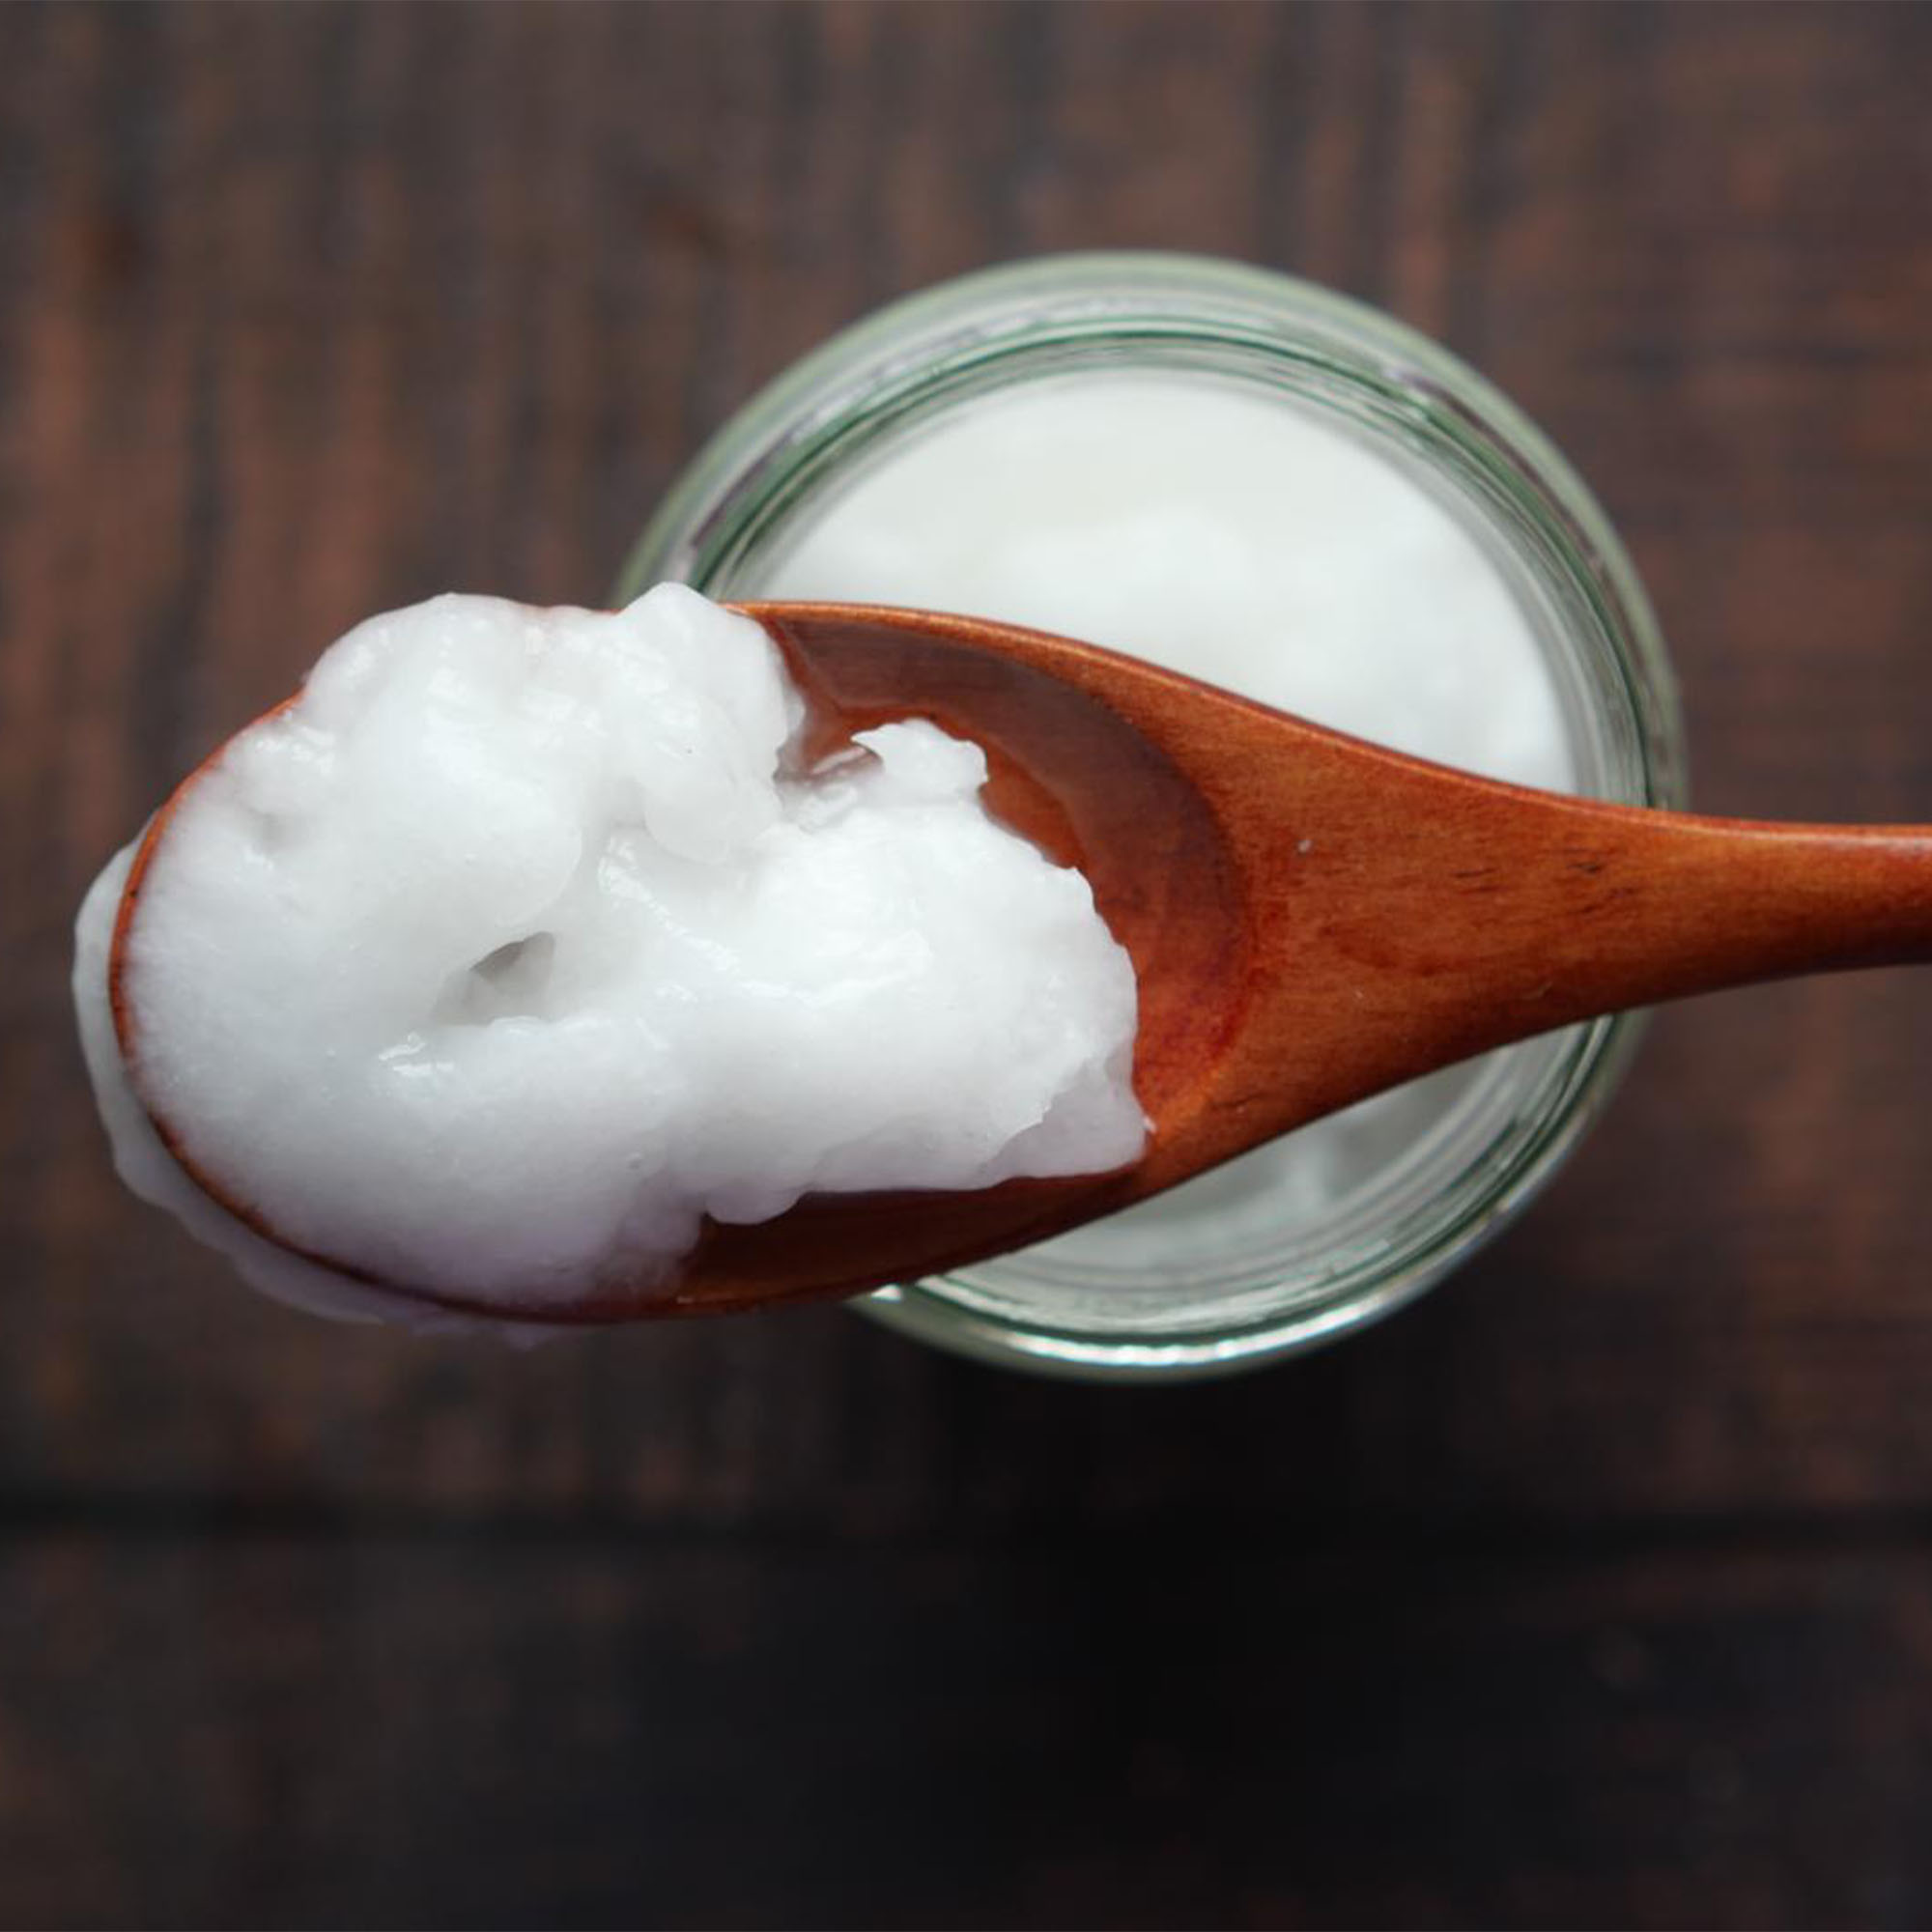 A wooden spoon holding a spoonful of white, creamy coconut oil is positioned over an open jar filled with more coconut oil. The background reveals a dark wooden surface.